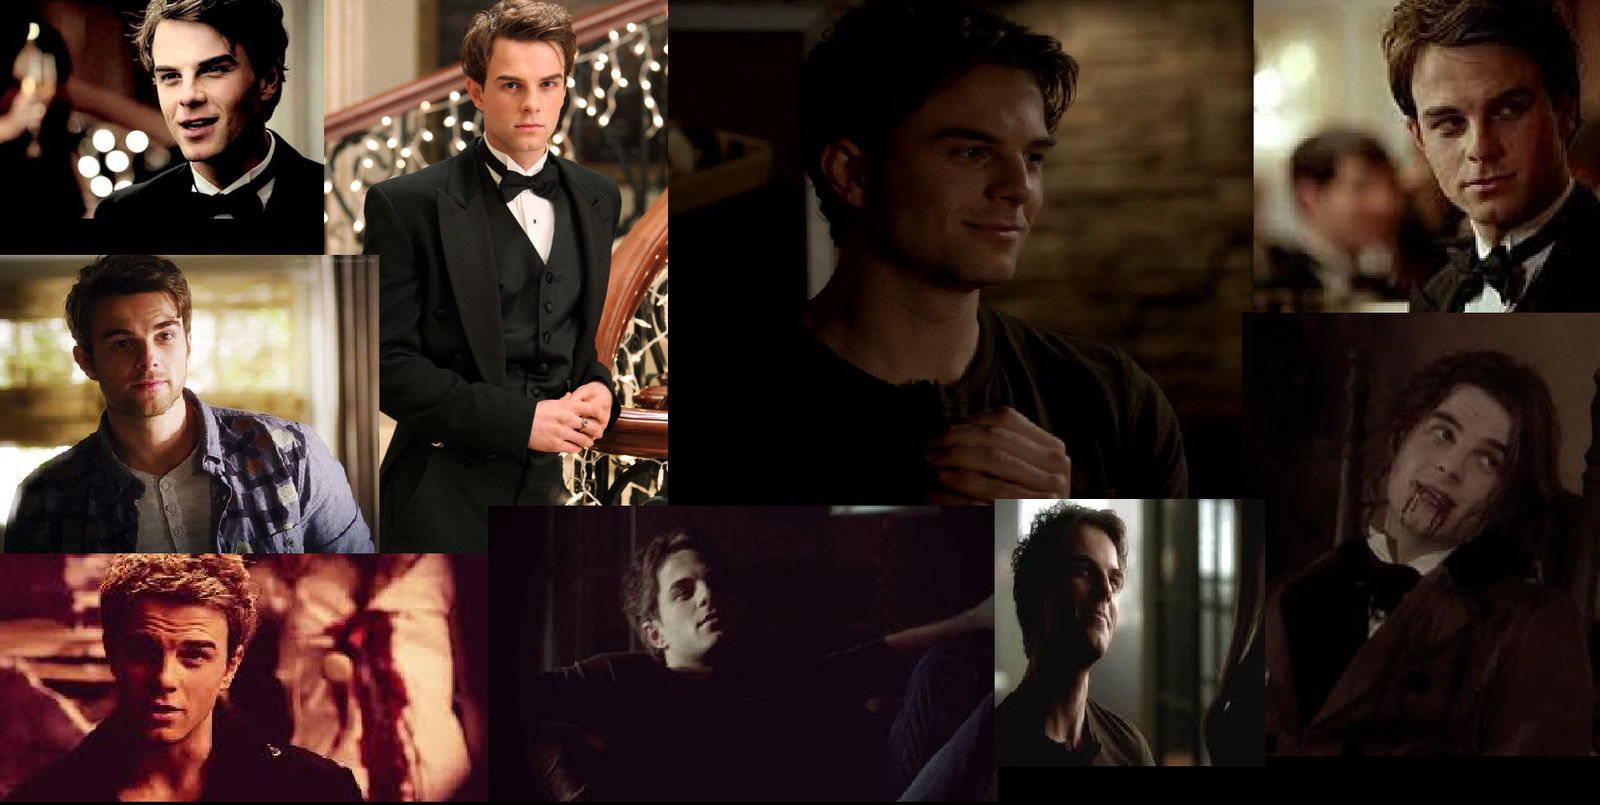 Kol Mikaelson by xx-Meaning-of-Life-x on DeviantArt